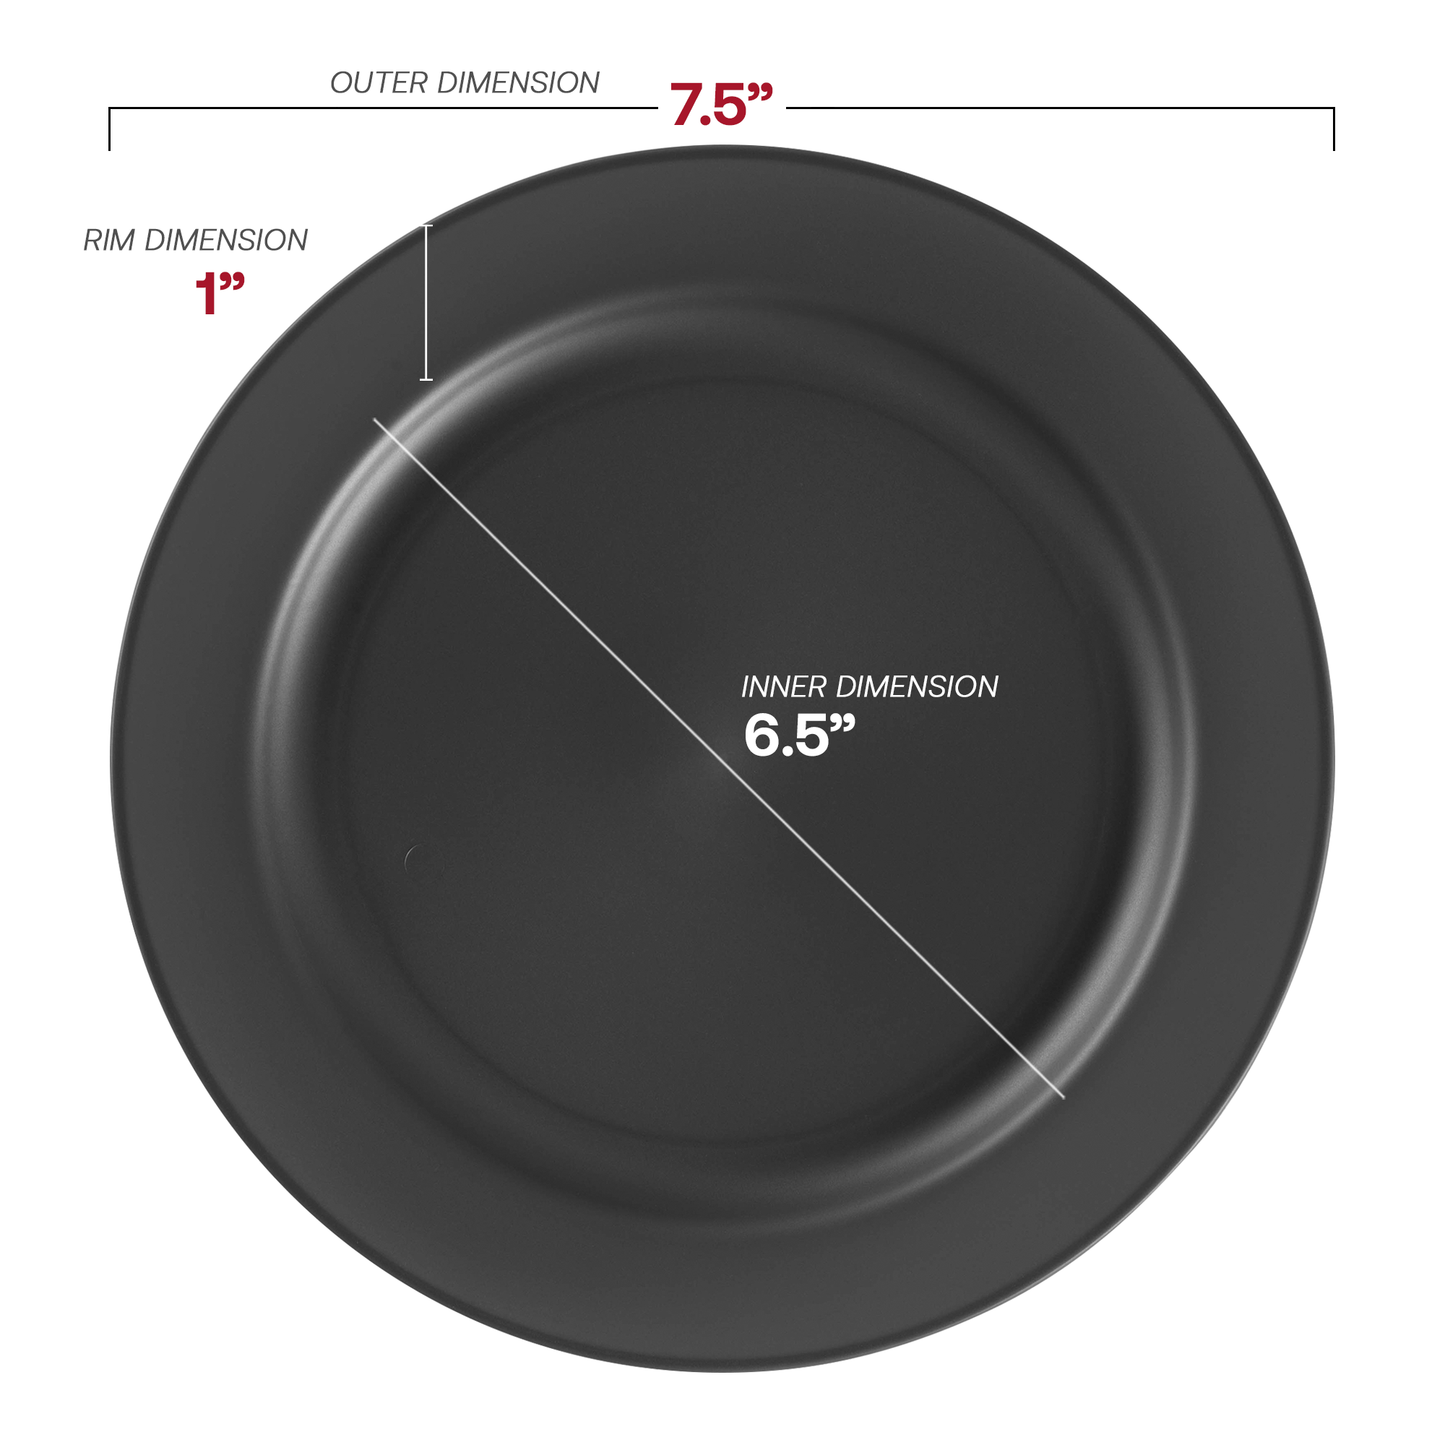 Matte Charcoal Gray Round Disposable Plastic Appetizer/Salad Plates (7.5") Dimension | The Kaya Collection